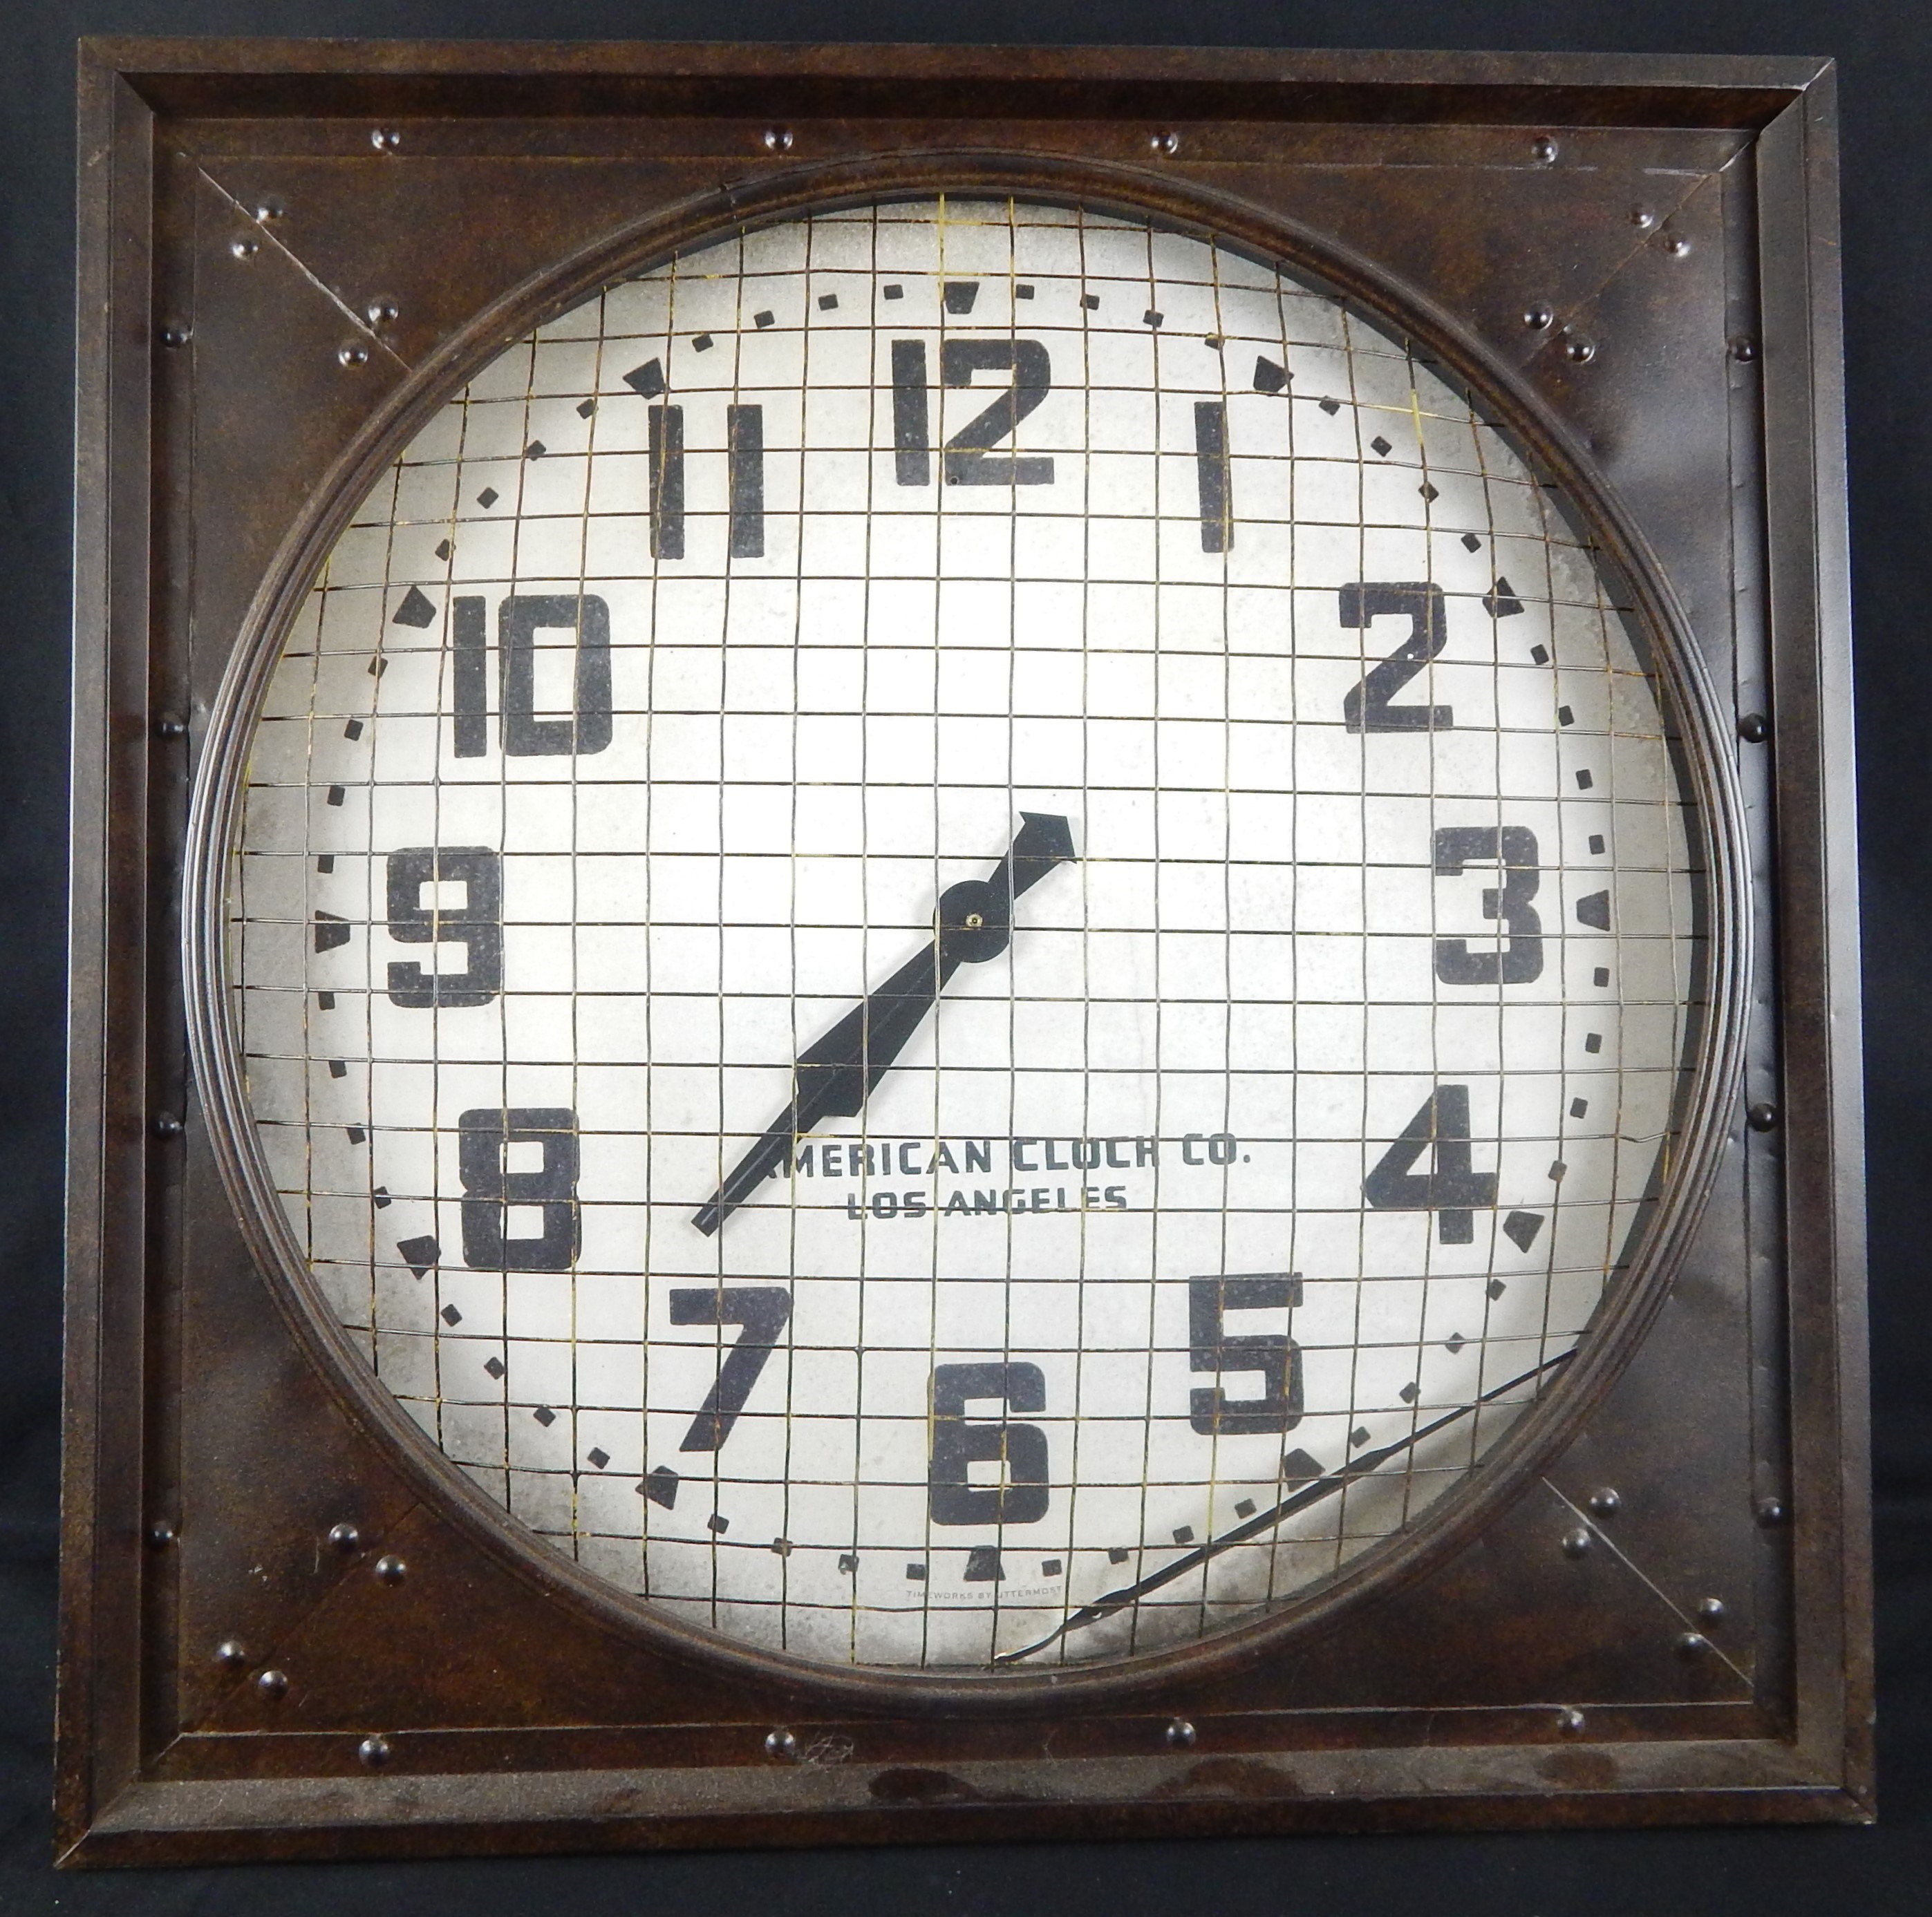 1930s Basketball Gymnasium Clock By American Clock Co. (Perfect Reproduction)